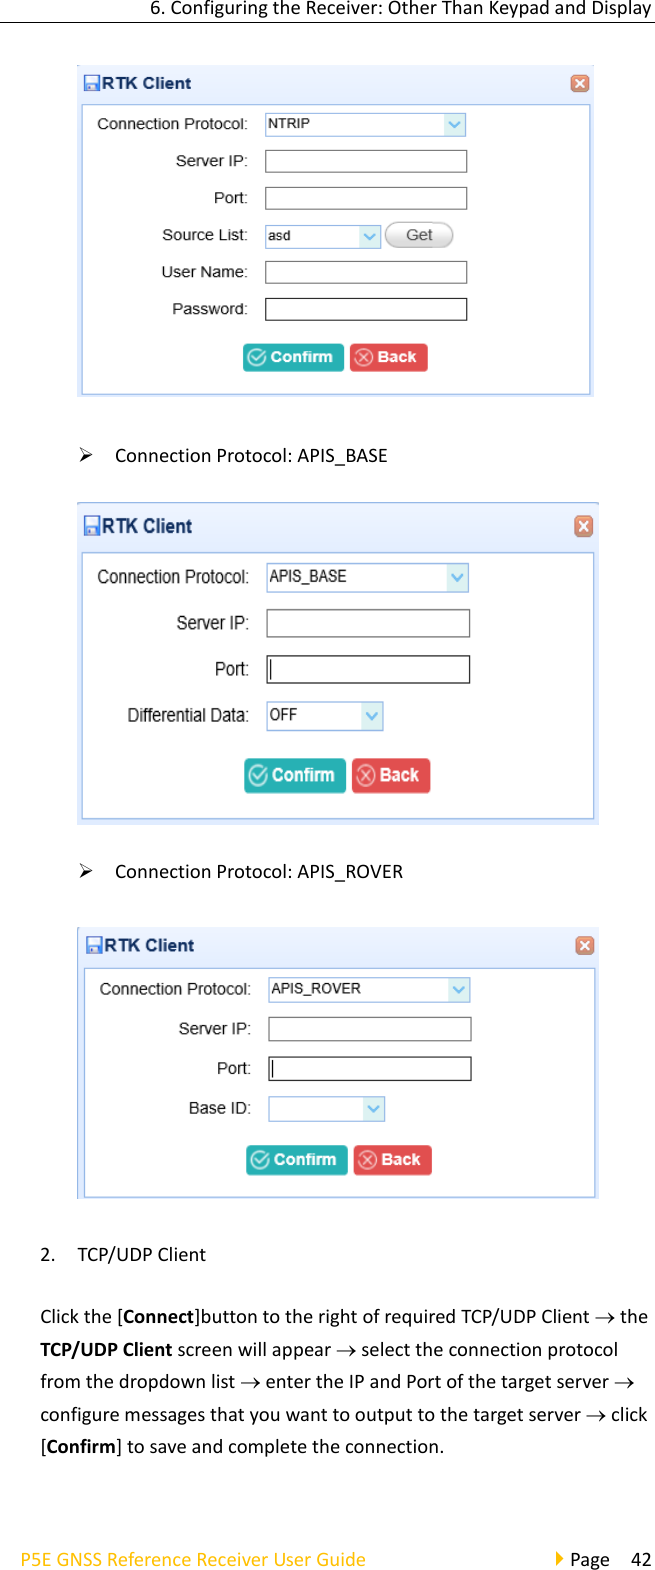 6. Configuring the Receiver: Other Than Keypad and Display P5E GNSS Reference Receiver User Guide                                     Page  42  ➢ Connection Protocol: APIS_BASE  ➢ Connection Protocol: APIS_ROVER  2. TCP/UDP Client Click the [Connect]button to the right of required TCP/UDP Client  the TCP/UDP Client screen will appear  select the connection protocol from the dropdown list  enter the IP and Port of the target server  configure messages that you want to output to the target server  click [Confirm] to save and complete the connection.   